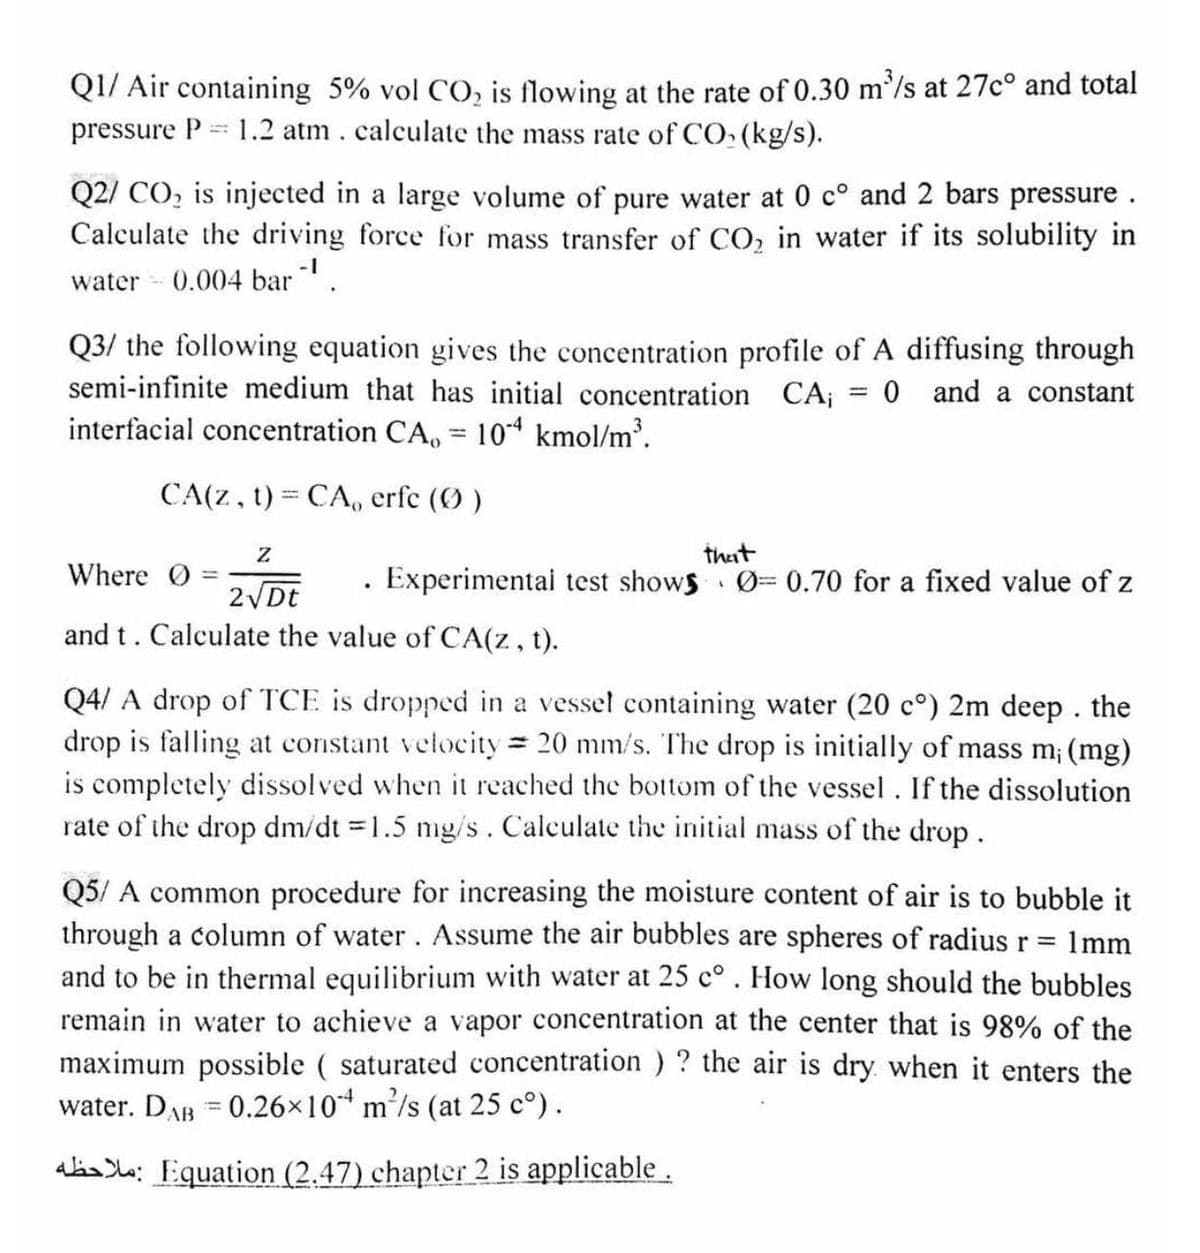 Q1/ Air containing 5% vol CO, is flowing at the rate of 0.30 m'/s at 27c° and total
1.2 atm. calculate the mass rate of CO, (kg/s).
pressure P
Q2/ CO, is injected in a large volume of pure water at 0 c° and 2 bars pressure .
Calculate the driving force for mass transfer of CO, in water if its solubility in
-1
water - 0.004 bar.
Q3/ the following equation gives the concentration profile of A diffusing through
semi-infinite medium that has initial concentration CA;
0 and a constant
interfacial concentration CA, = 104 kmol/m³.
CA(Z, t) = CA, erfe (O )
that
Experimentai test shows 0=0.70 for a fixed value of z
Where O
2 Dt
and t. Calculate the value of CA(z, t).
Q4/ A drop of TCE is dropped in a vessel containing water (20 c°) 2m deep. the
drop is falling at constant velocity 20 mm/s. The drop is initially of mass m; (mg)
is completely dissolved when it reached the bottom of the vessel. If the dissolution
rate of the drop dm/dt 1.5 mg/s. Calculate the initial mass of the drop.
%3|
Q5/ A common procedure for increasing the moisture content of air is to bubble it
through a column of water. Assume the air bubbles are spheres of radius r%3D
and to be in thermal equilibrium with water at 25 c°. How long should the bubbles
remain in water to achieve a vapor concentration at the center that is 98% of the
maximum possible ( saturated concentration ) ? the air is dry when it enters the
water. DAB = 0.26x10 m/s (at 25 c°).
1mm
alas le: Equation (2.47) chapter 2 is applicable.
